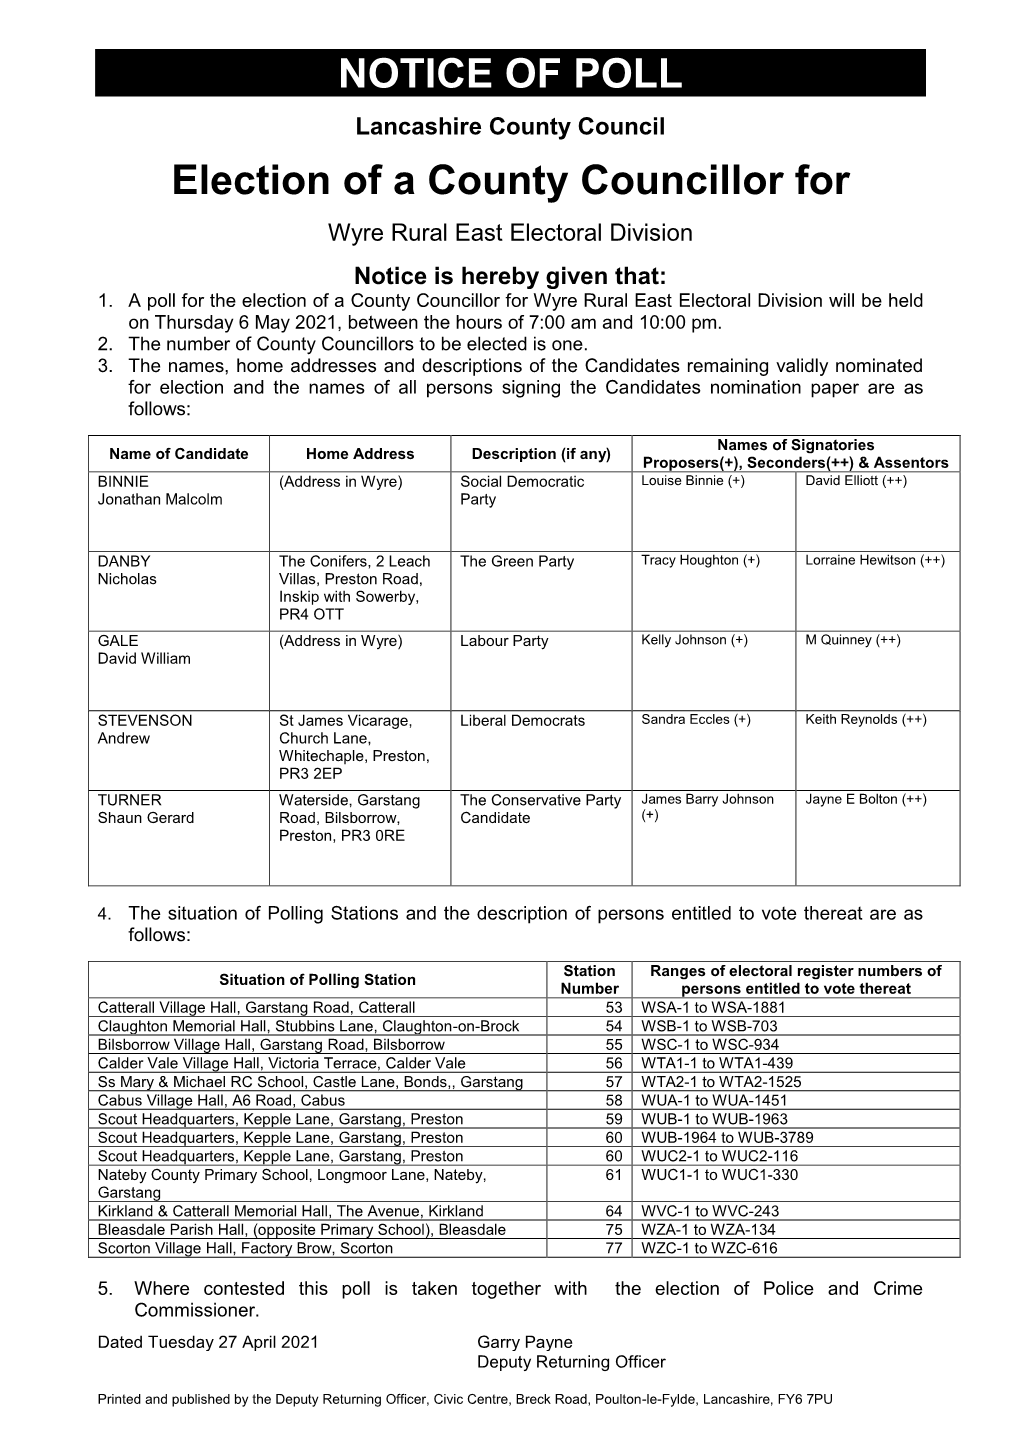 NOTICE of POLL Election of a County Councillor